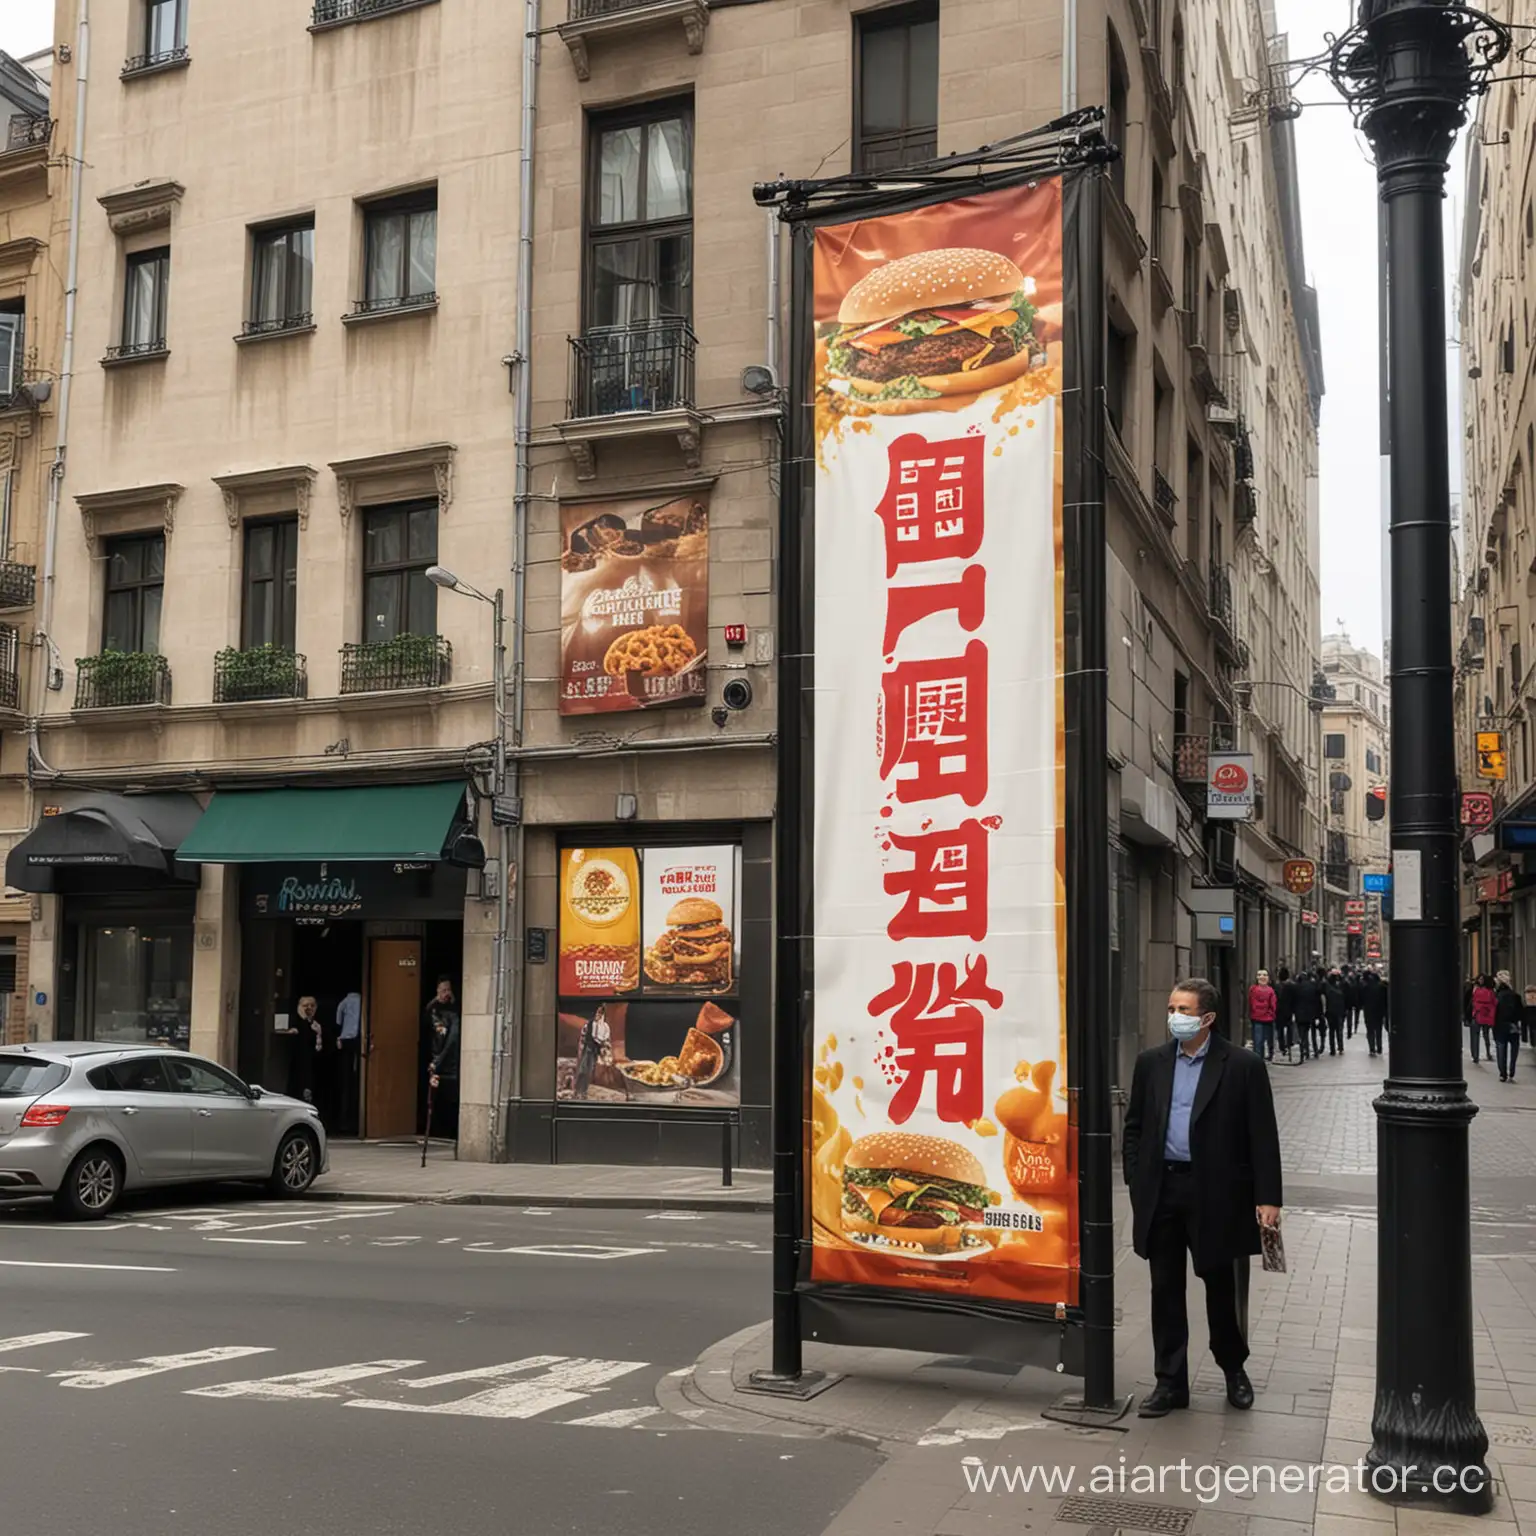 City-Street-Advertising-Banners-Restaurant-and-Cinema-Promotions